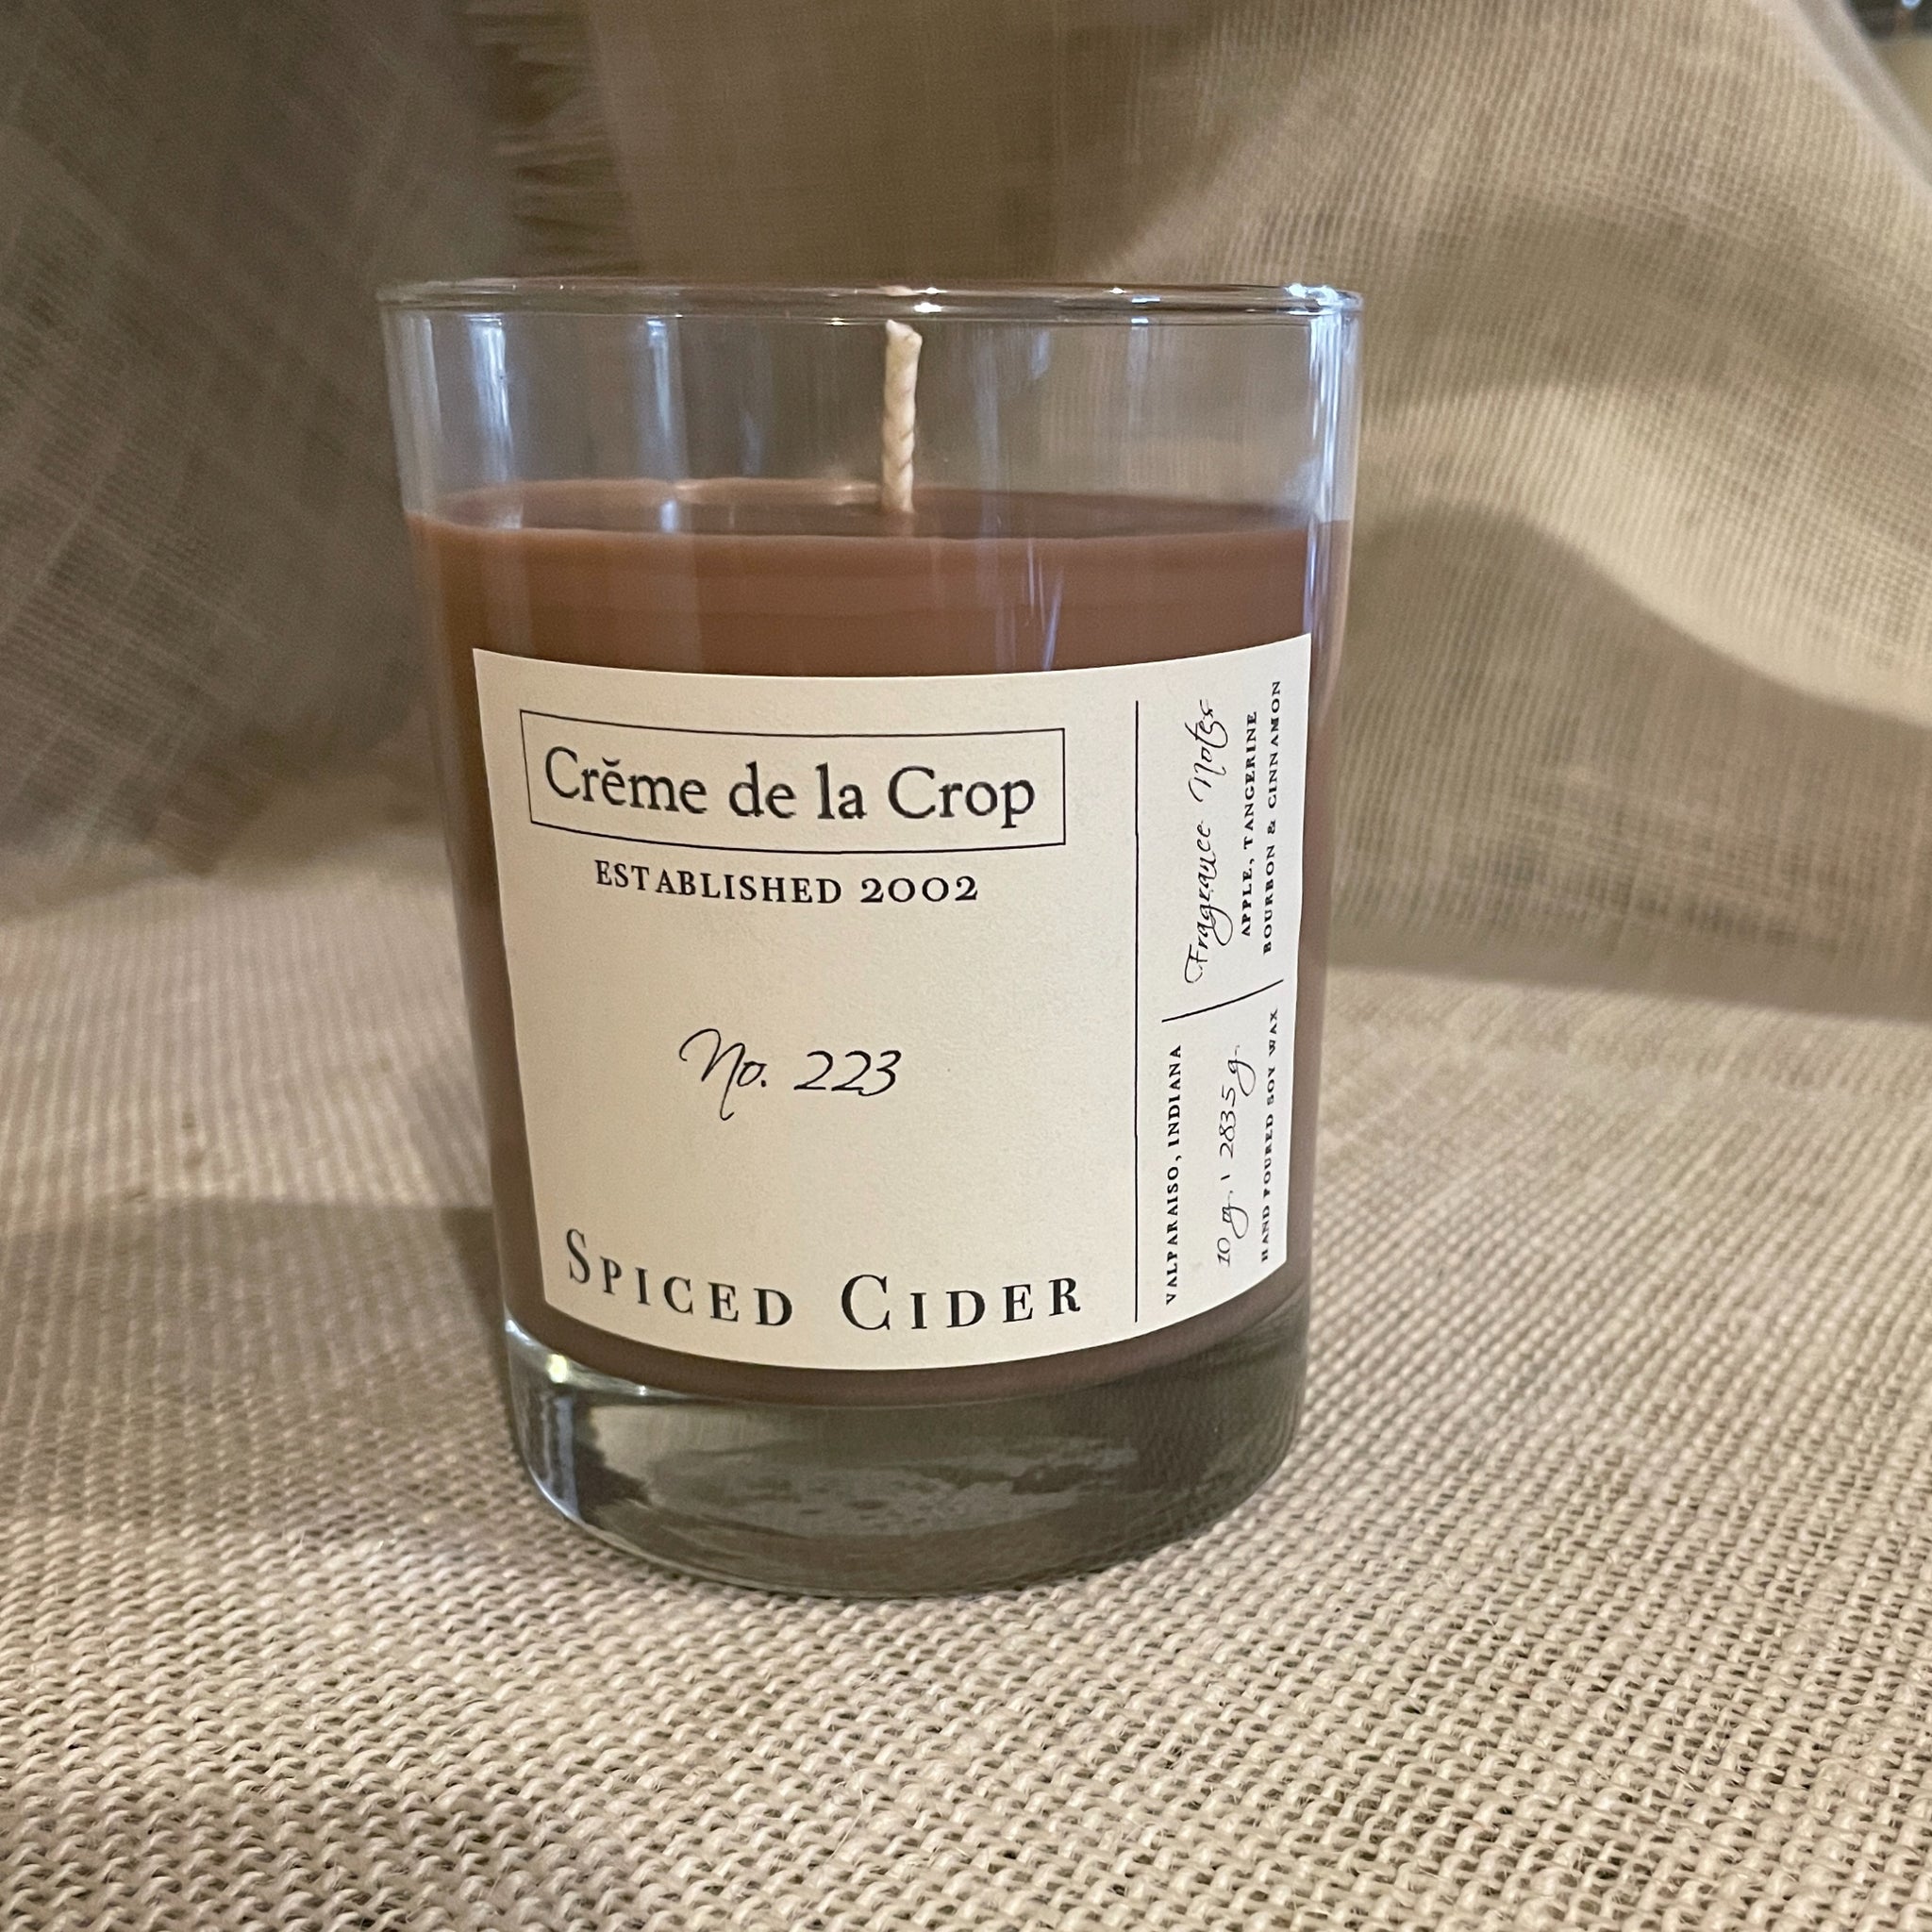 Soy Candle - Spiced Cider For an intriguing, upscale take on a traditional apple spice fragrance, try Spiced Cider. This mouthwatering, boozy scent starts with top notes of apple, cinnamon, front